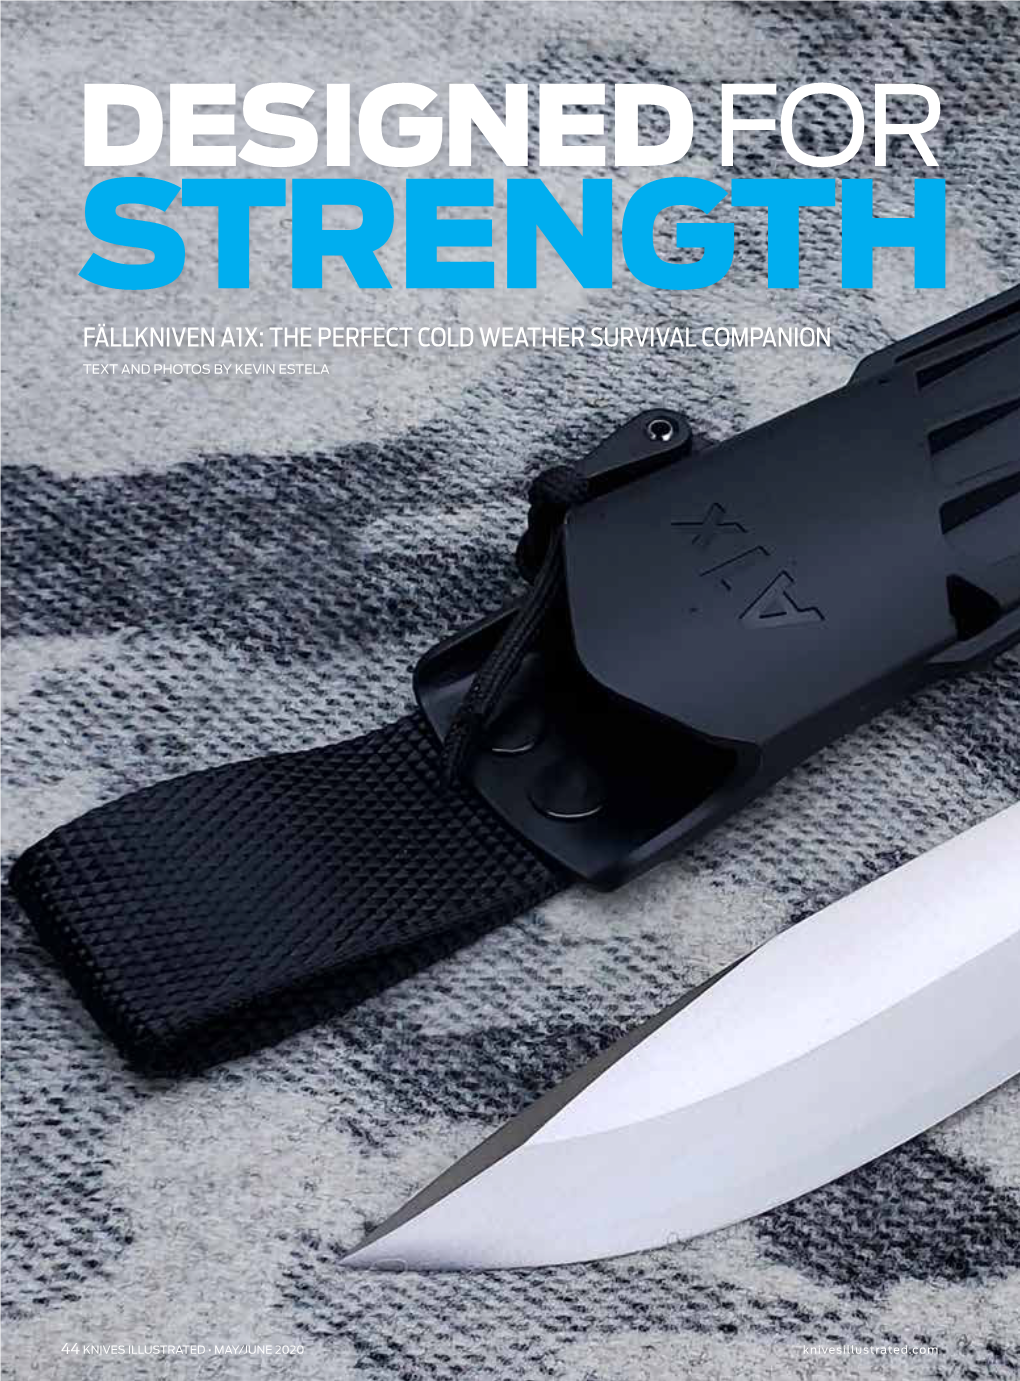 Designed for Strength Fällkniven A1x: the Perfect Cold Weather Survival Companion Text and Photos by Kevin Estela